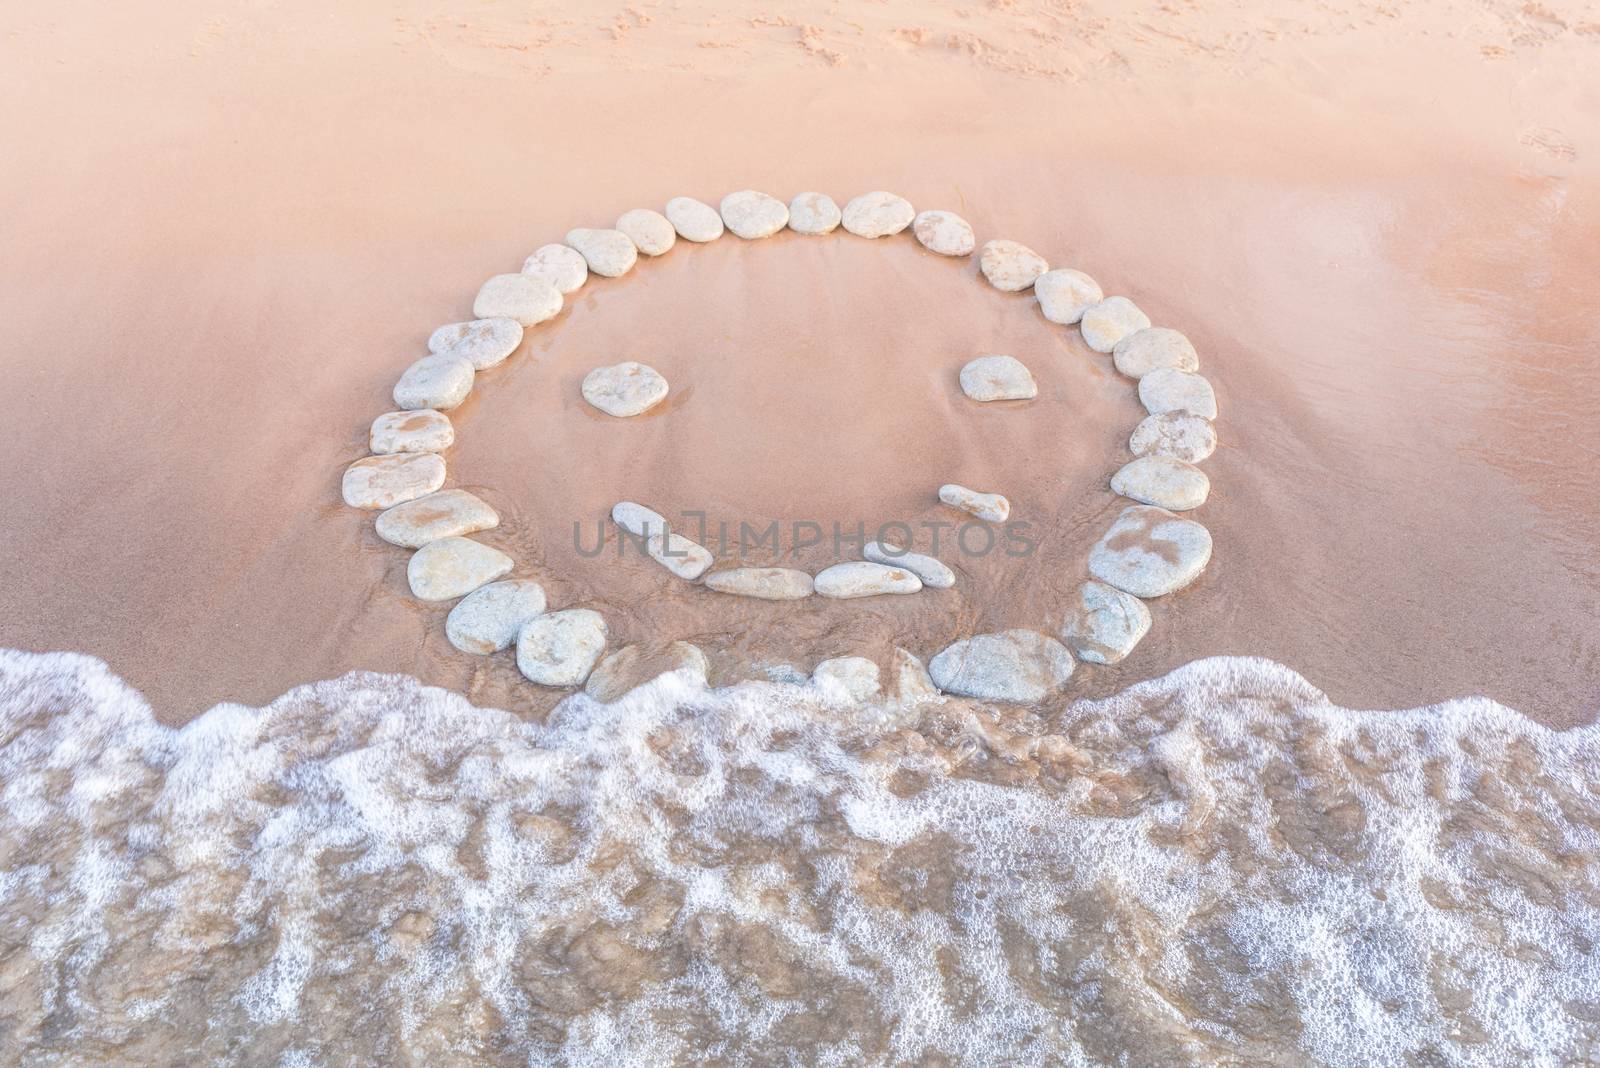 Emoticon of pebbles on the sandy beach